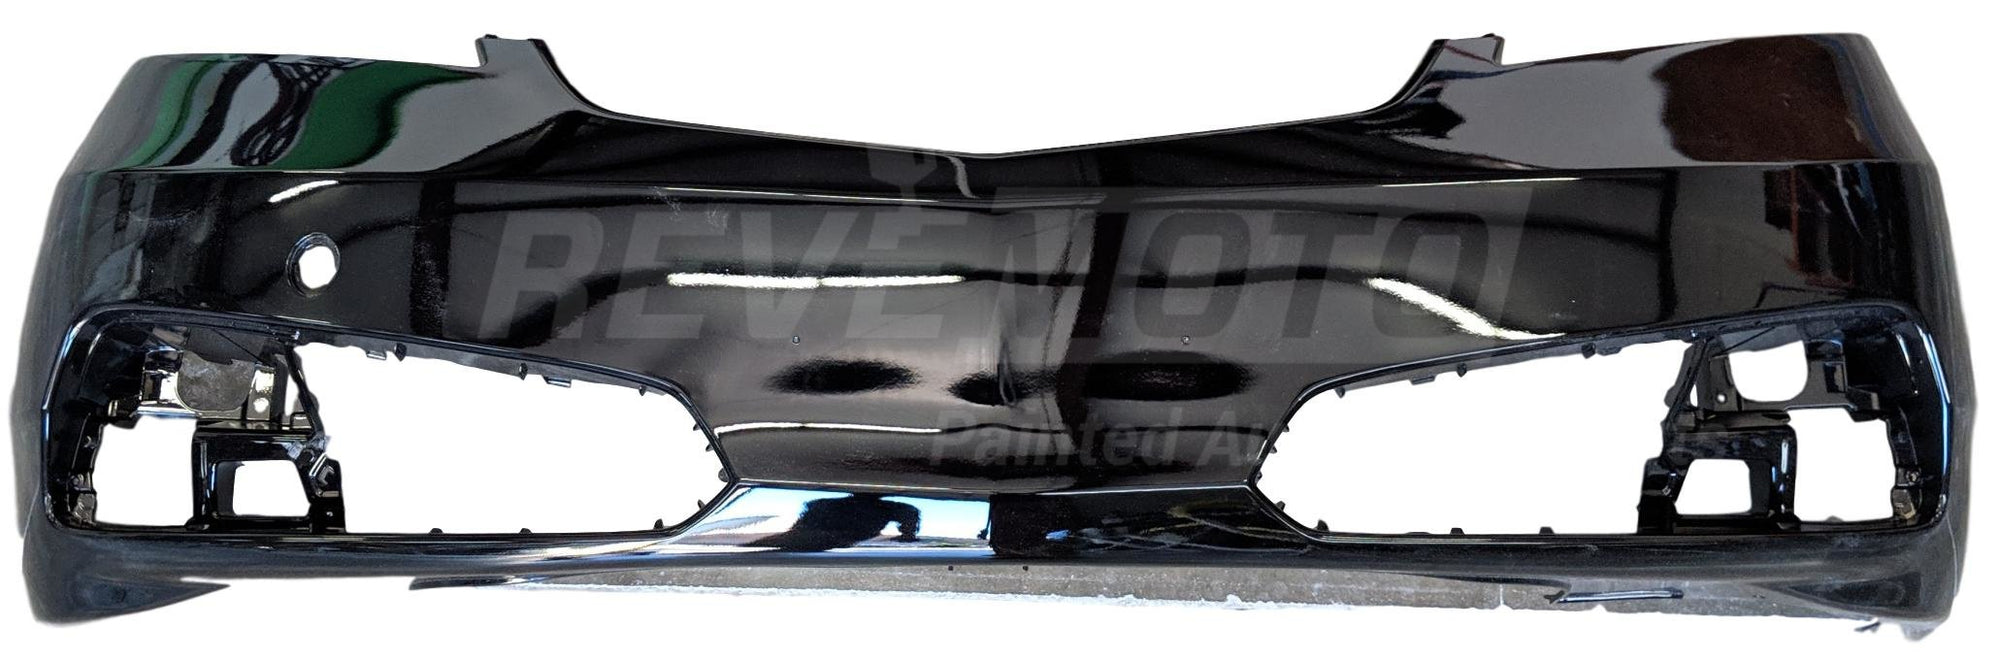 2014 Acura TL : Front Bumper Painted